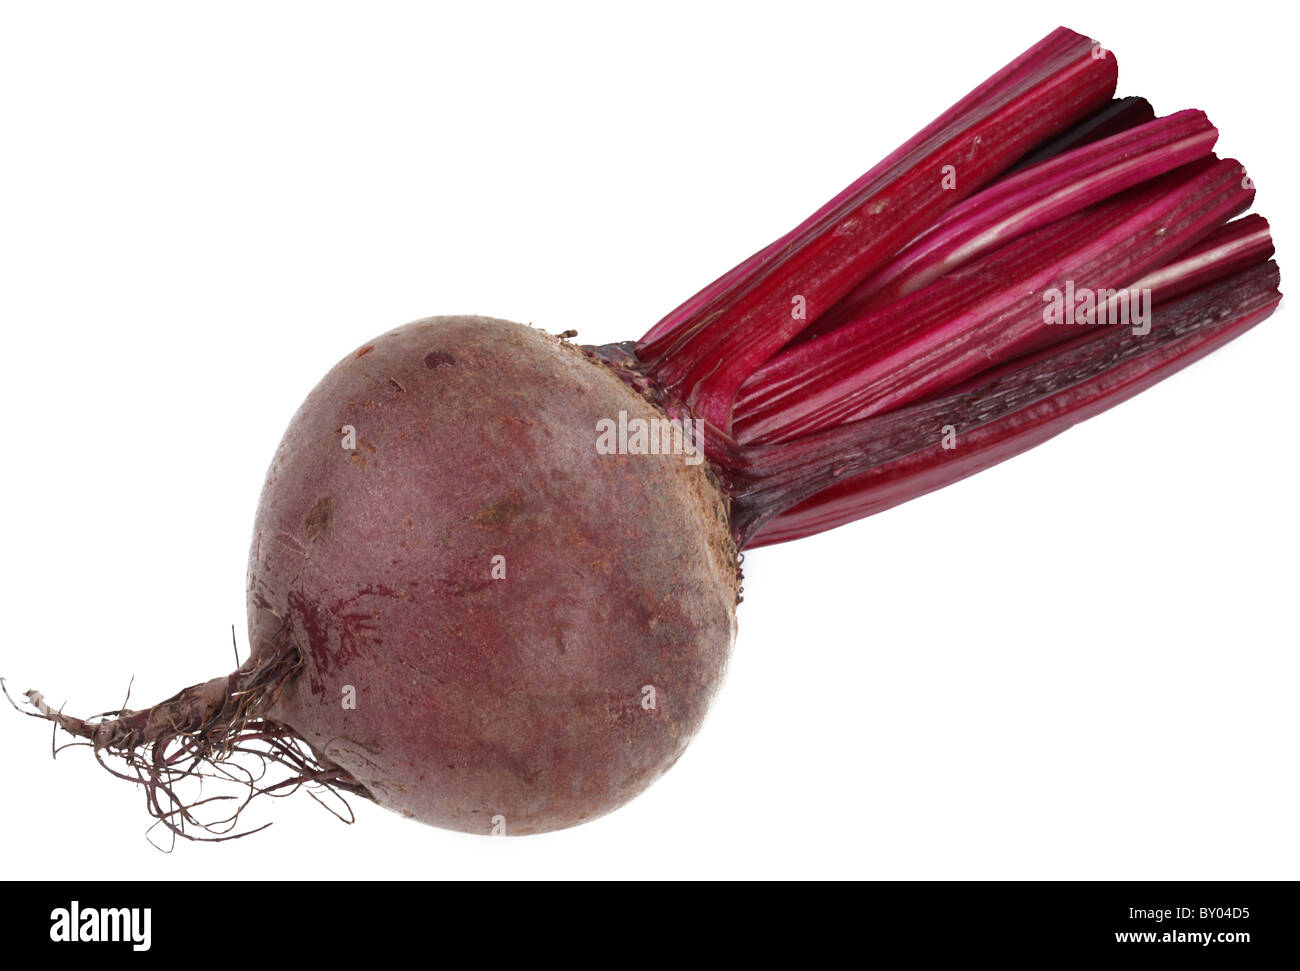 Image of beet on white background. The file contains a path to cut. Stock Photo